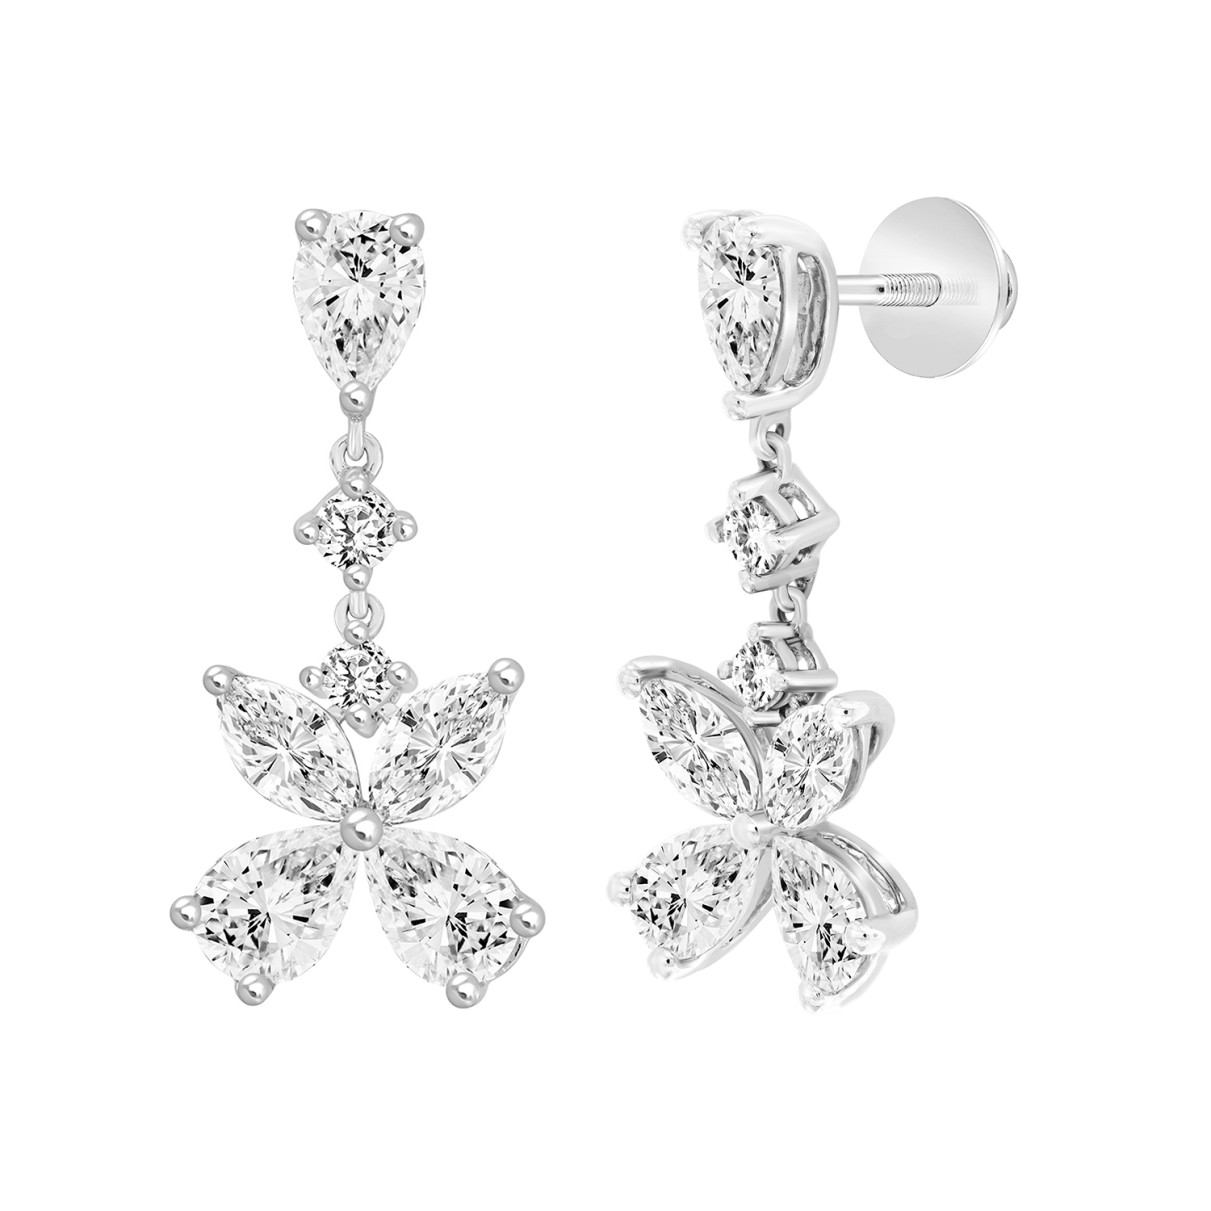 LADIES EARRINGS 3CT ROUND/MARQUISE/PEAR DIAMOND 14K WHITE GOLD